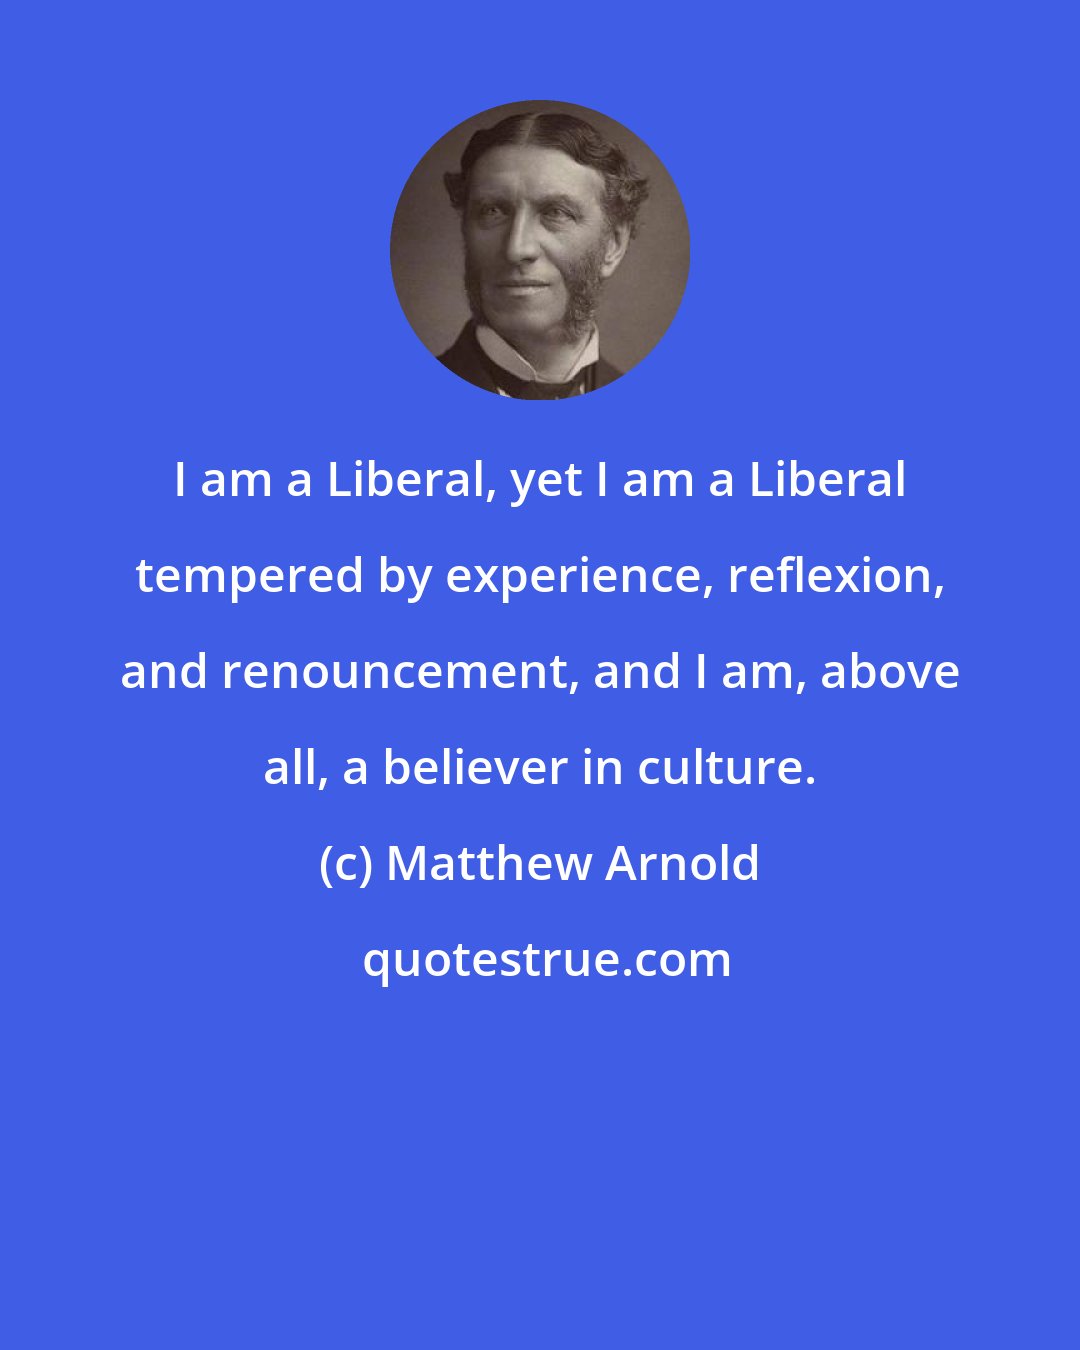 Matthew Arnold: I am a Liberal, yet I am a Liberal tempered by experience, reflexion, and renouncement, and I am, above all, a believer in culture.